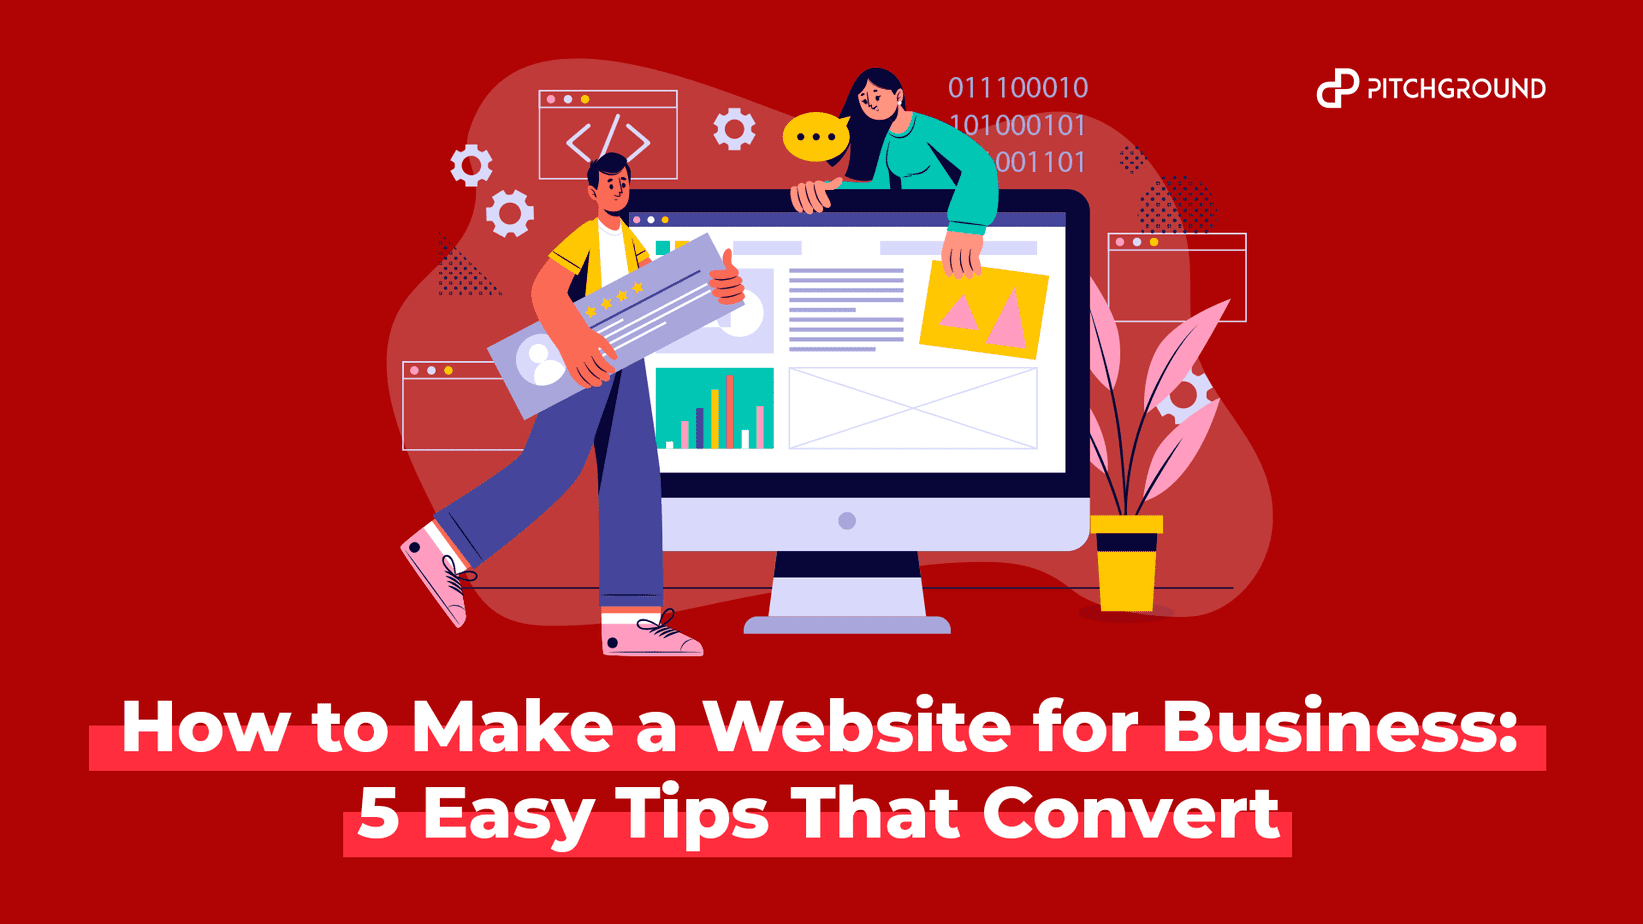 How to make a website for business